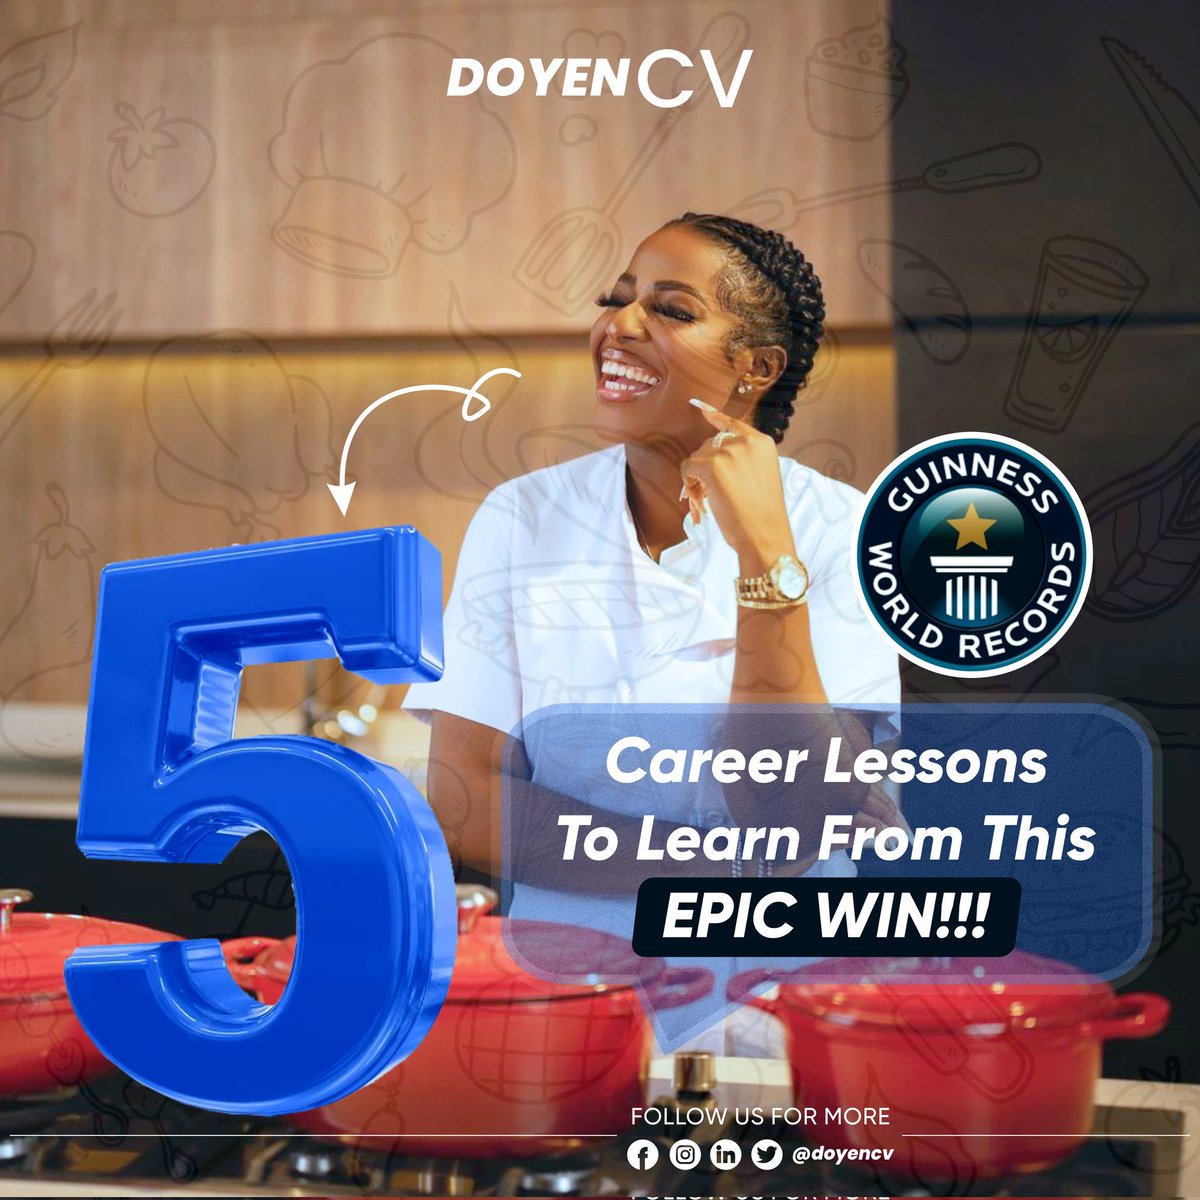 Congratulations to Hilda

Click the link below to see 5 Career lessons we learnt from this WIN!!!

#100hrs #96hrs #96hours
#hilda #Hildabacicookathon
#Hildabacicooks #HildaBacci
#doyencv #twitter #guinessworldrecord

linkedin.com/posts/doyen-cv…